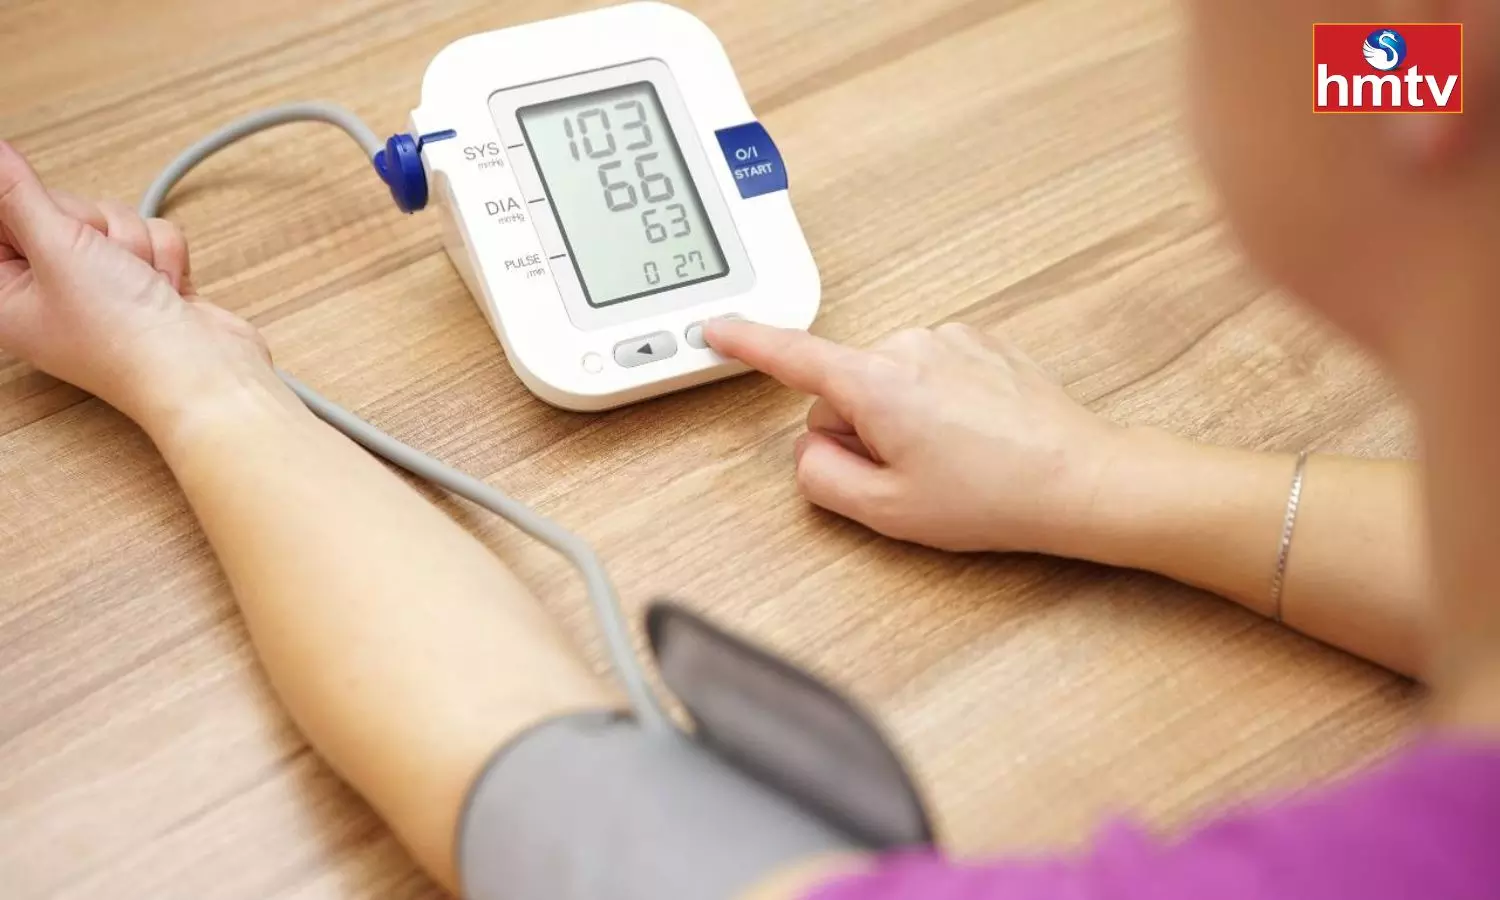 Low Blood Pressure is Also Dangerous Control it With These Methods